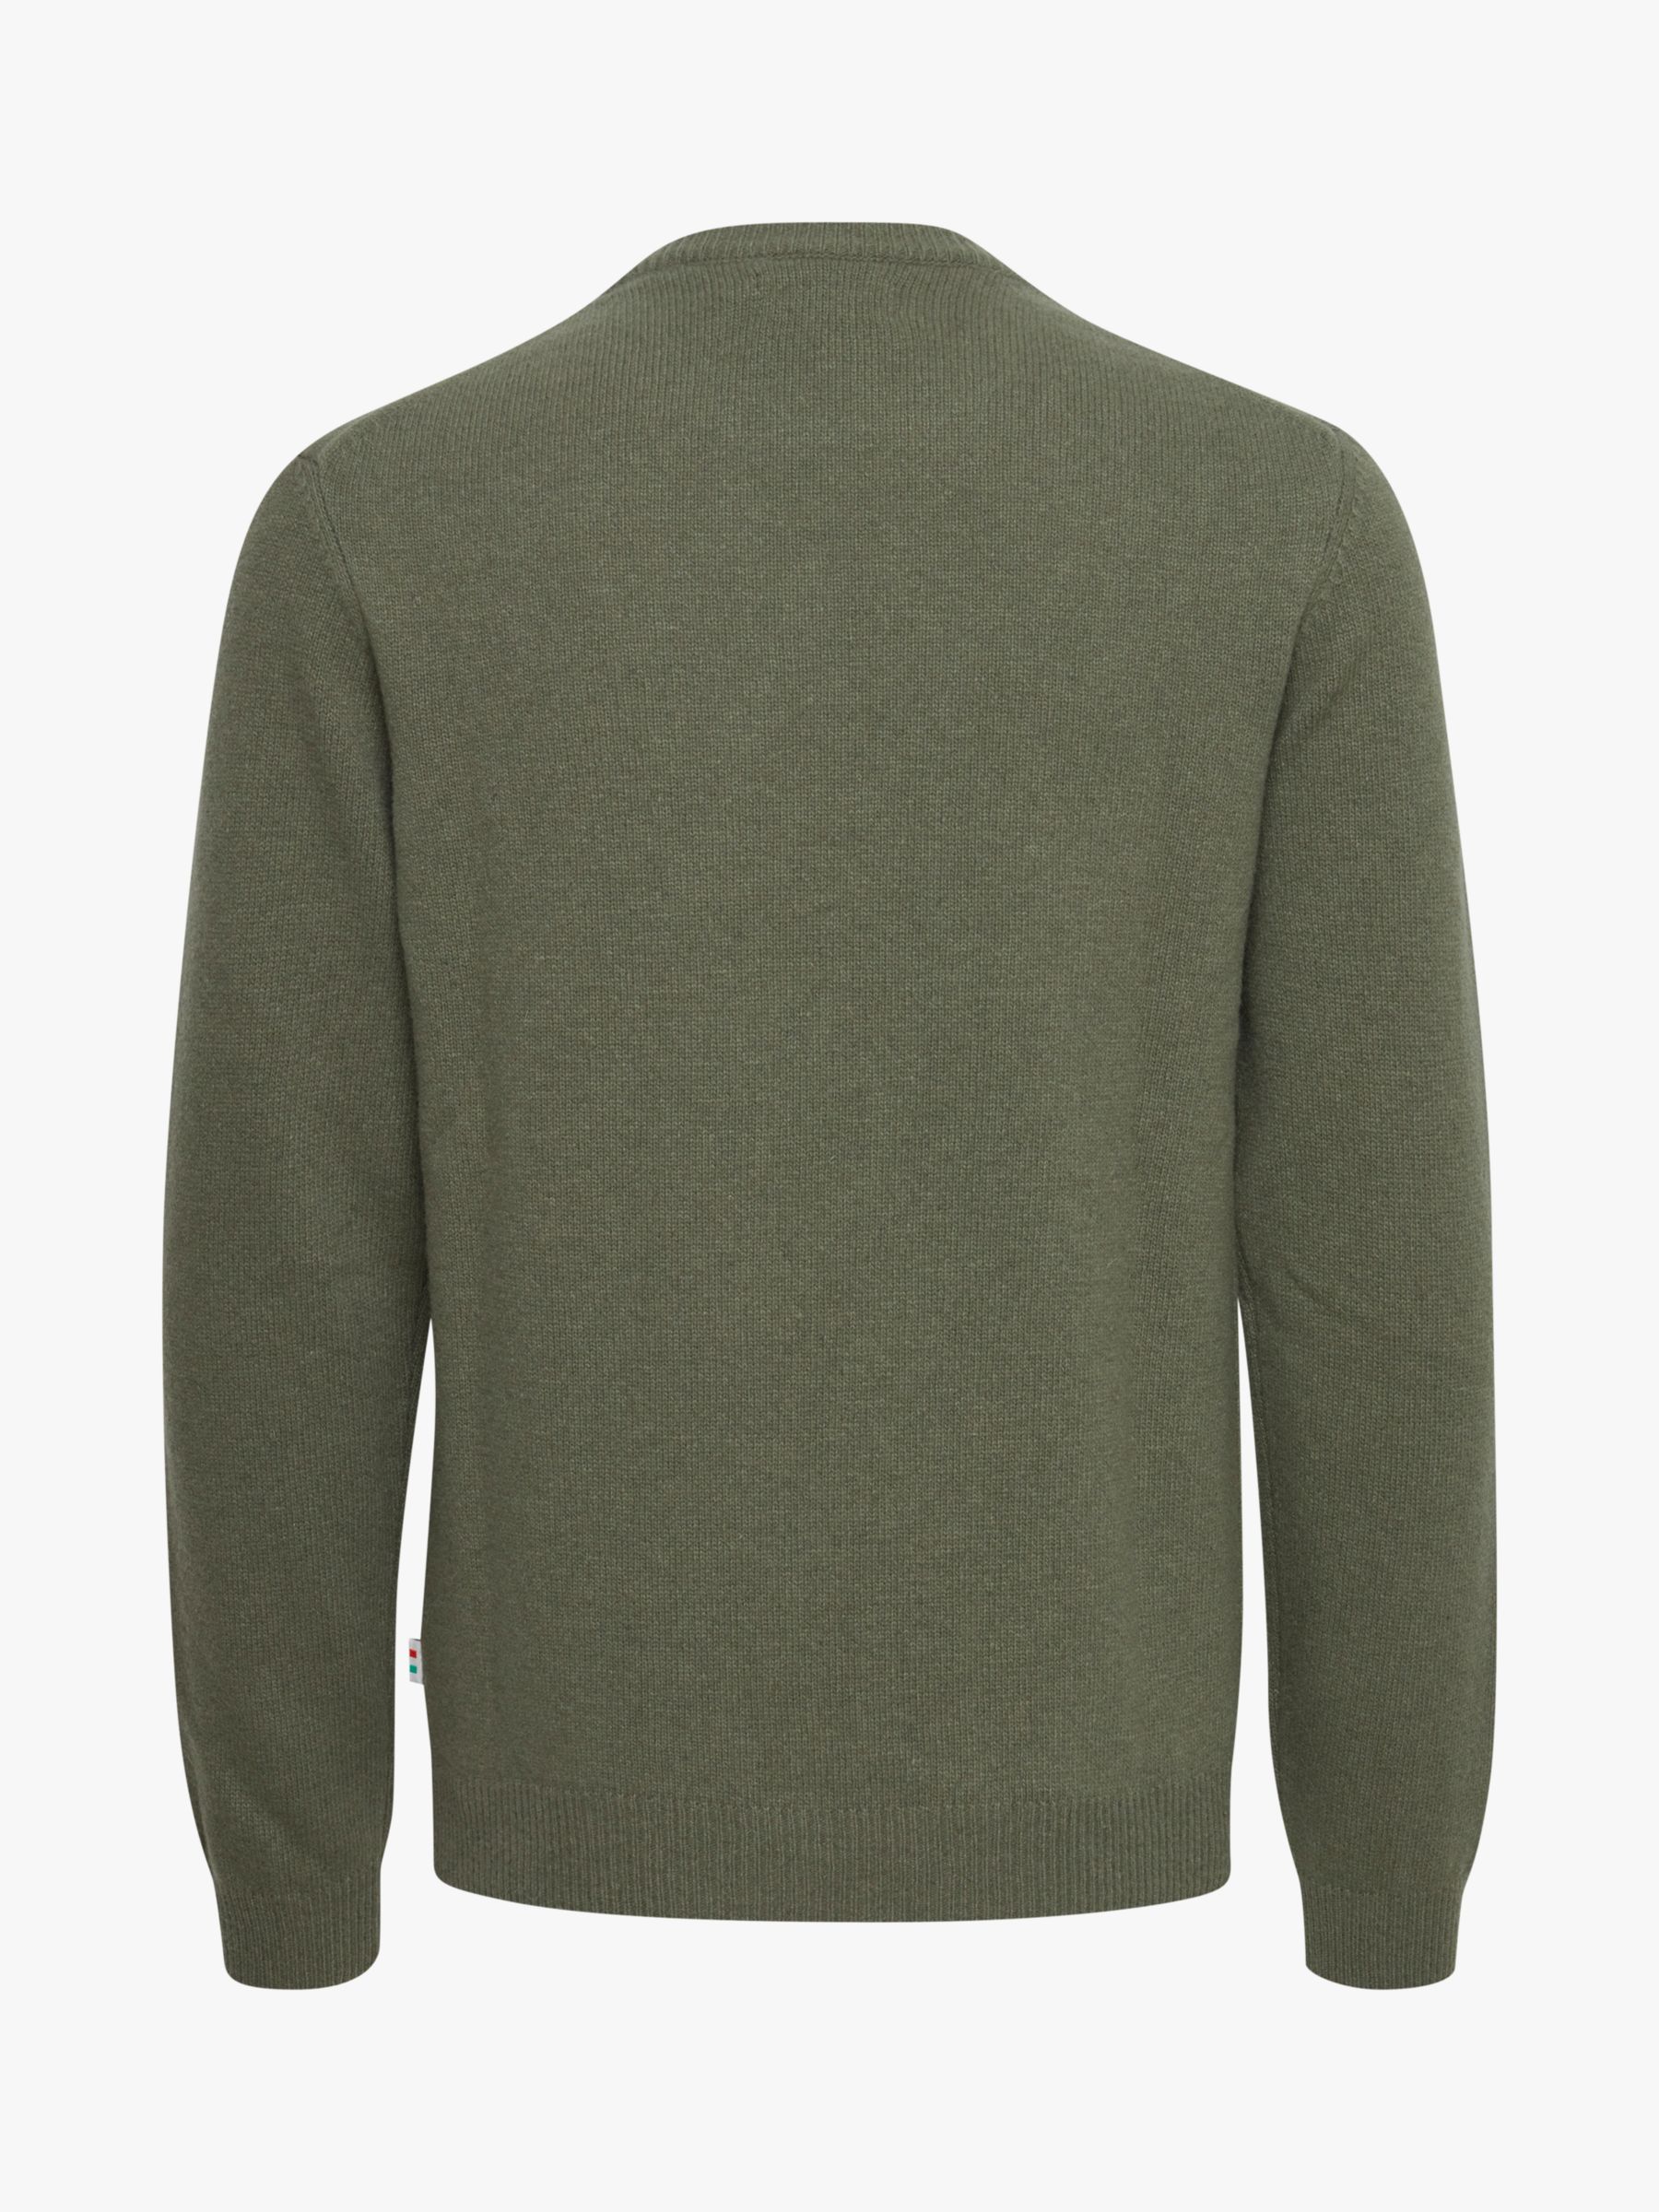 Buy Casual Friday Karl Crew Neck Bounty Knit Jumper Online at johnlewis.com